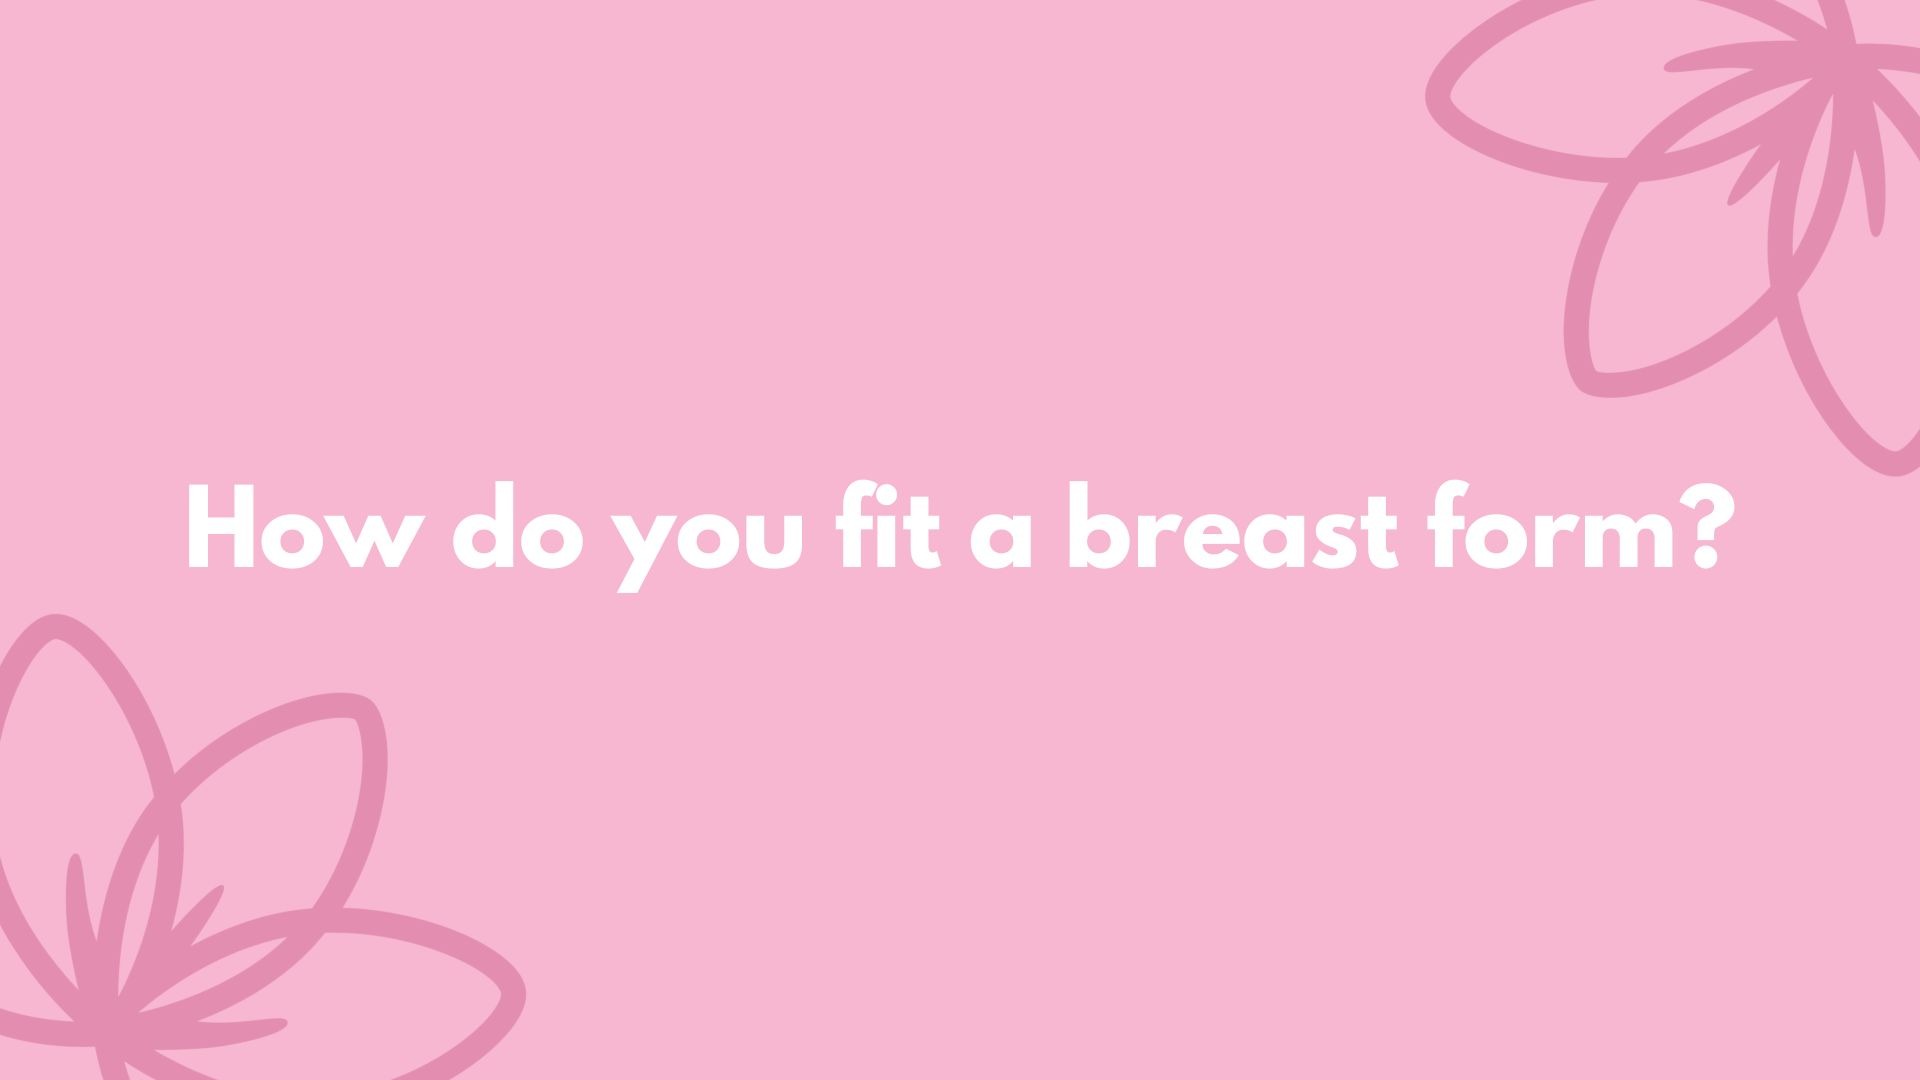 How to fit a breast form